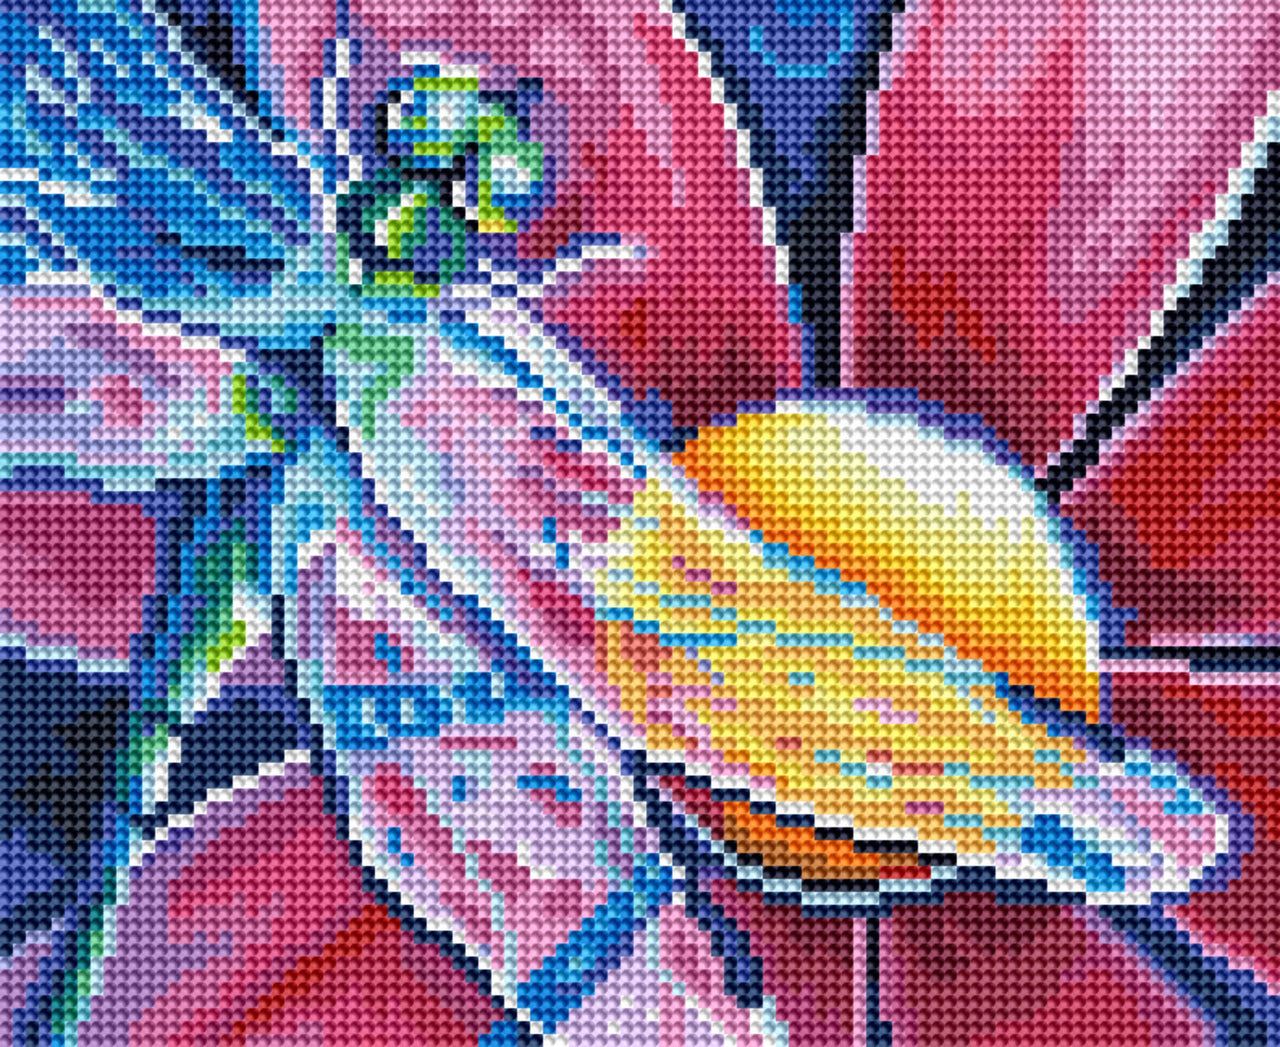 Diamond Painting Pink Daisy Dragonfly 11" x 9" (27.7cm x 22.7cm) / Round with 41 Colors including 4 ABs / 8,019